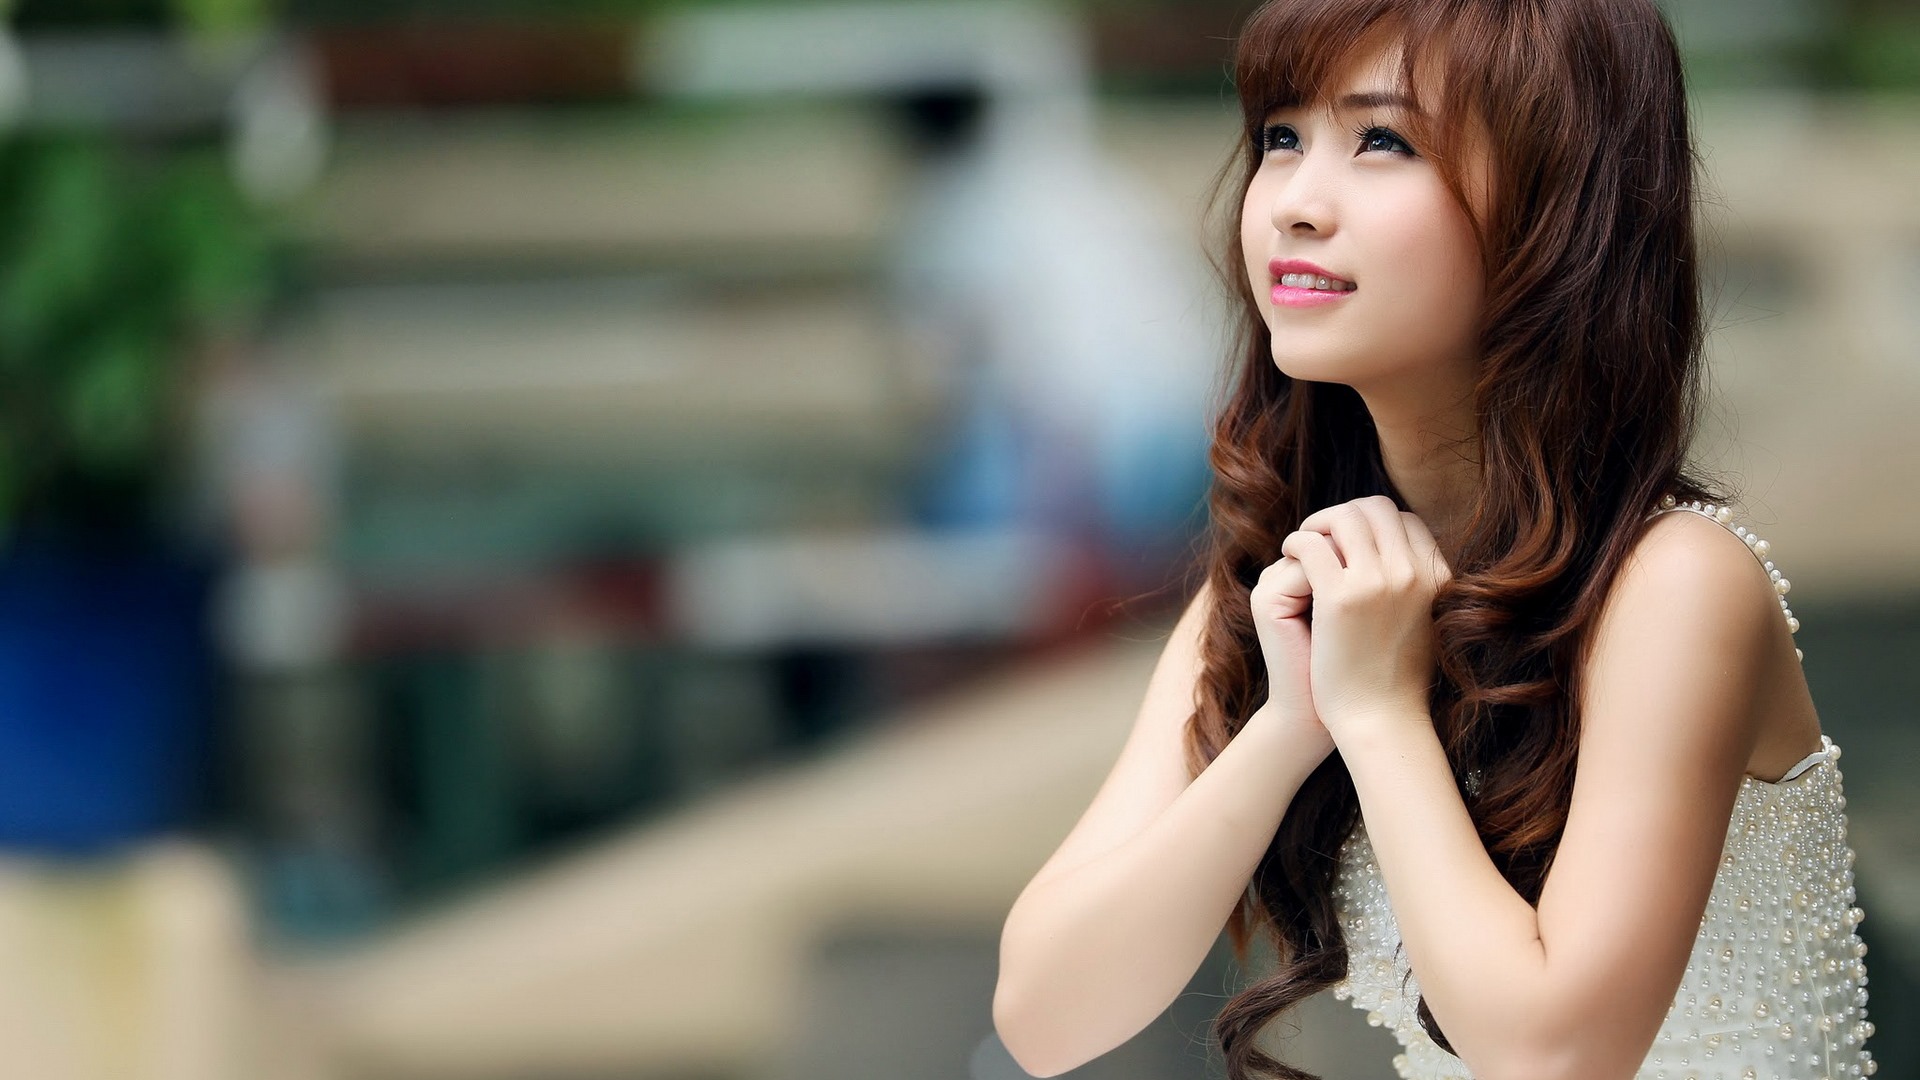 Pure and lovely young Asian girl HD wallpapers collection (2) #4 - 1920x1080